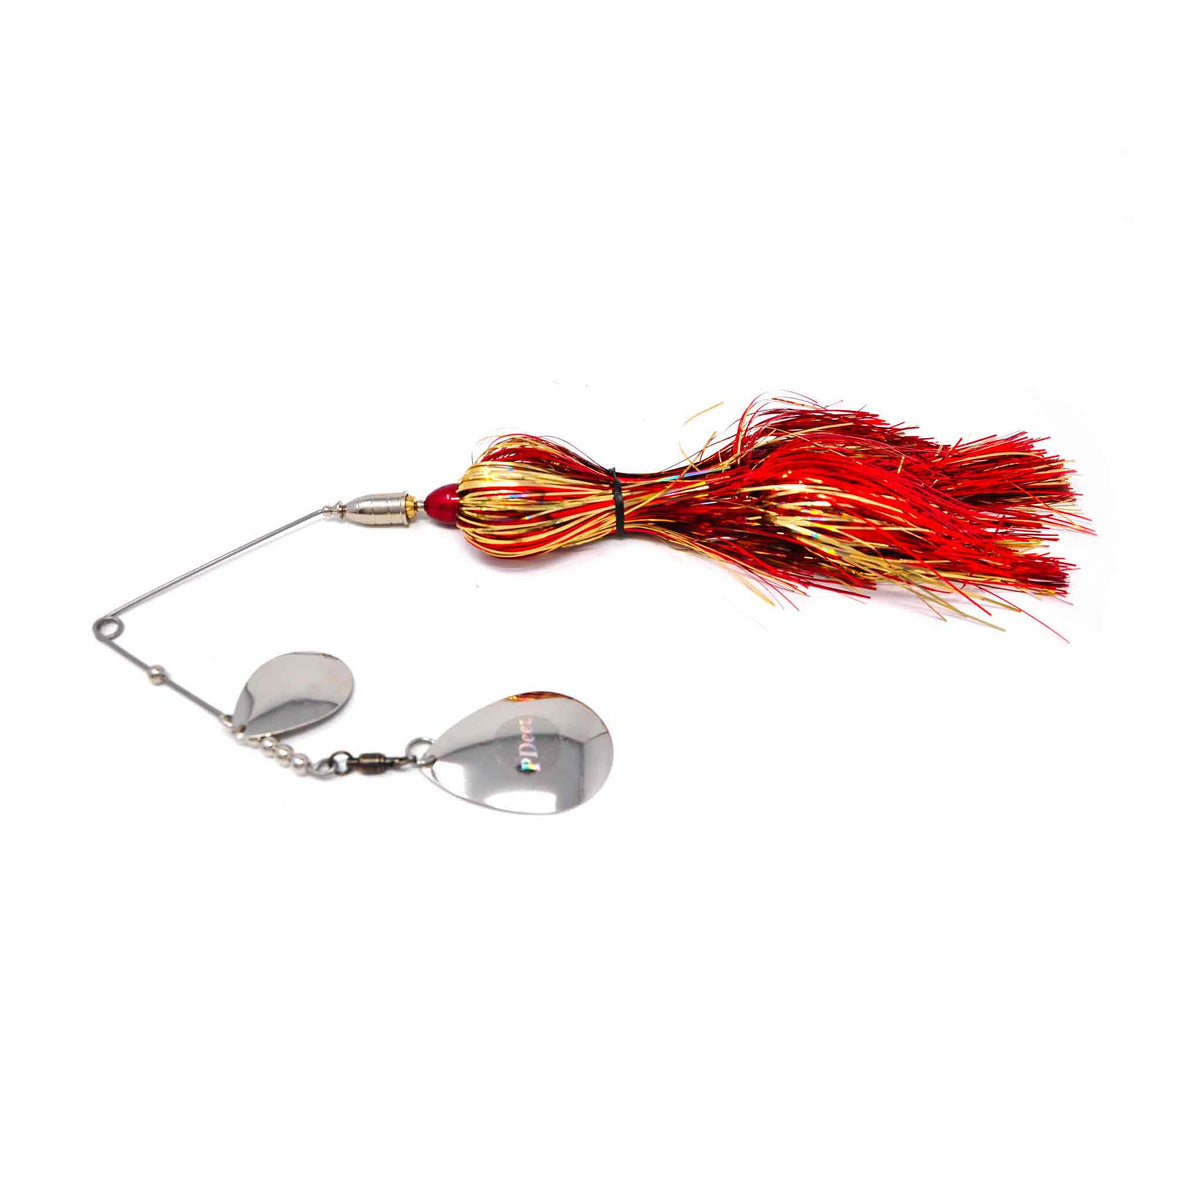 View of Spinnerbaits PDeez Bell Casting Spinnerbait Ironman 2.0 available at EZOKO Pike and Musky Shop